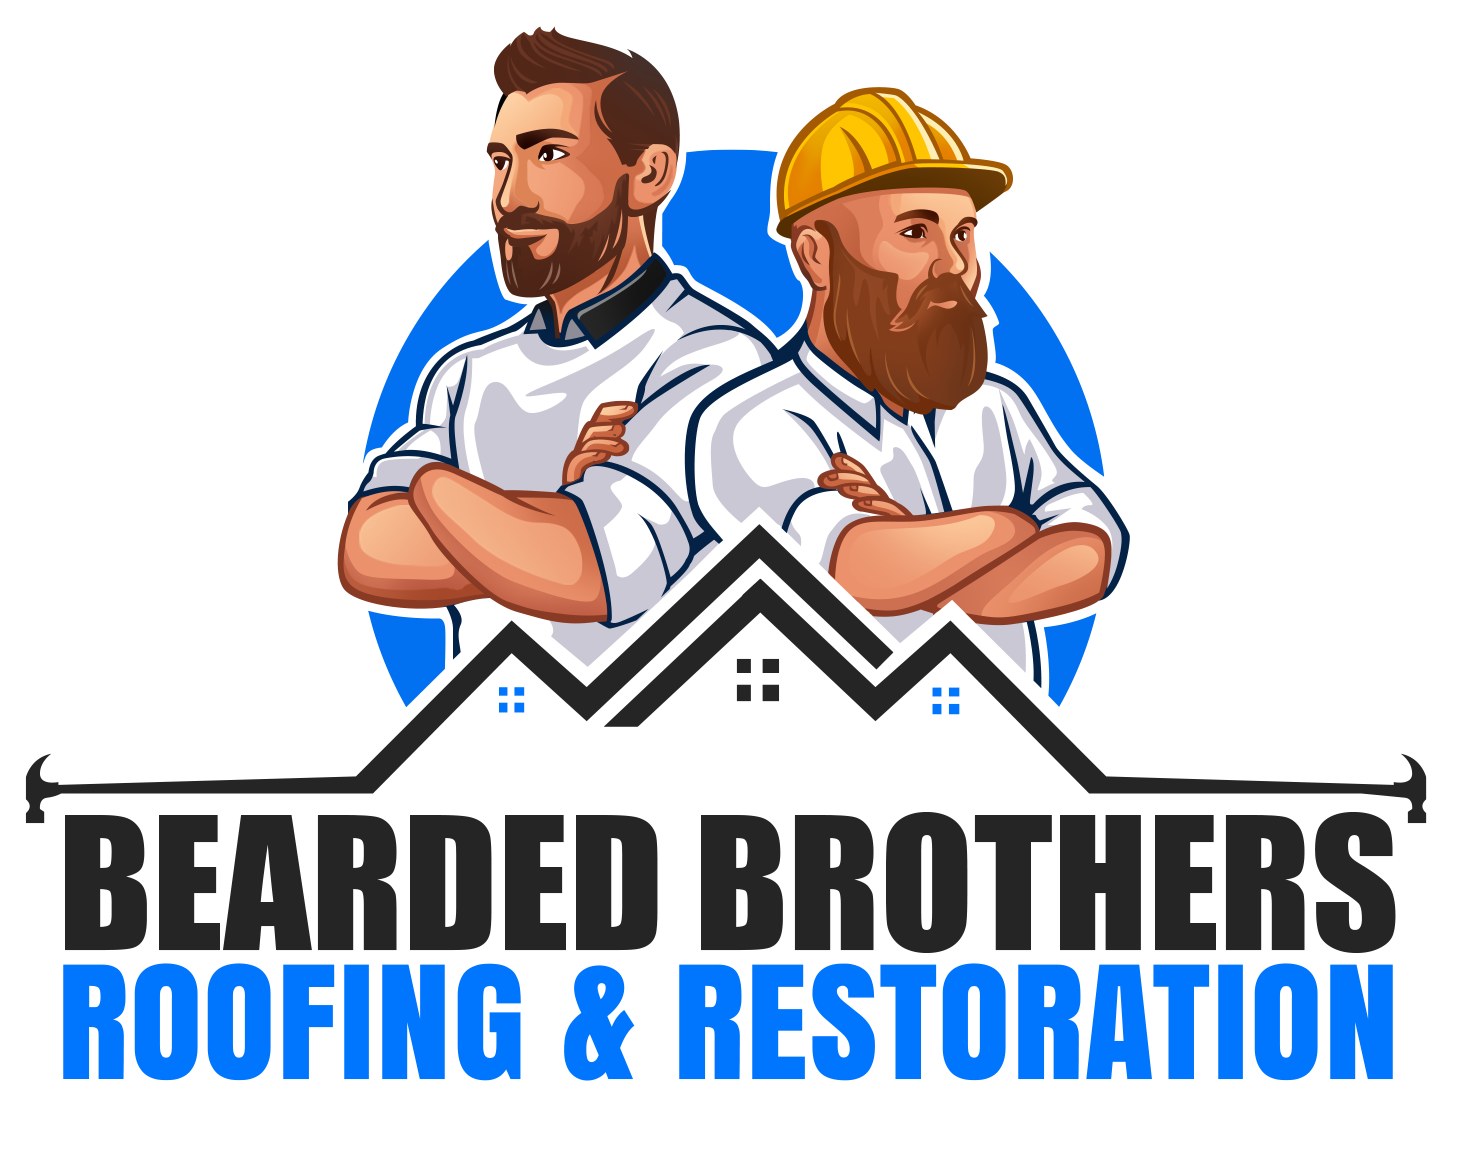 The 20 Best Roofing Companies Serving Dallas Fort Worth Houston Austin Texas